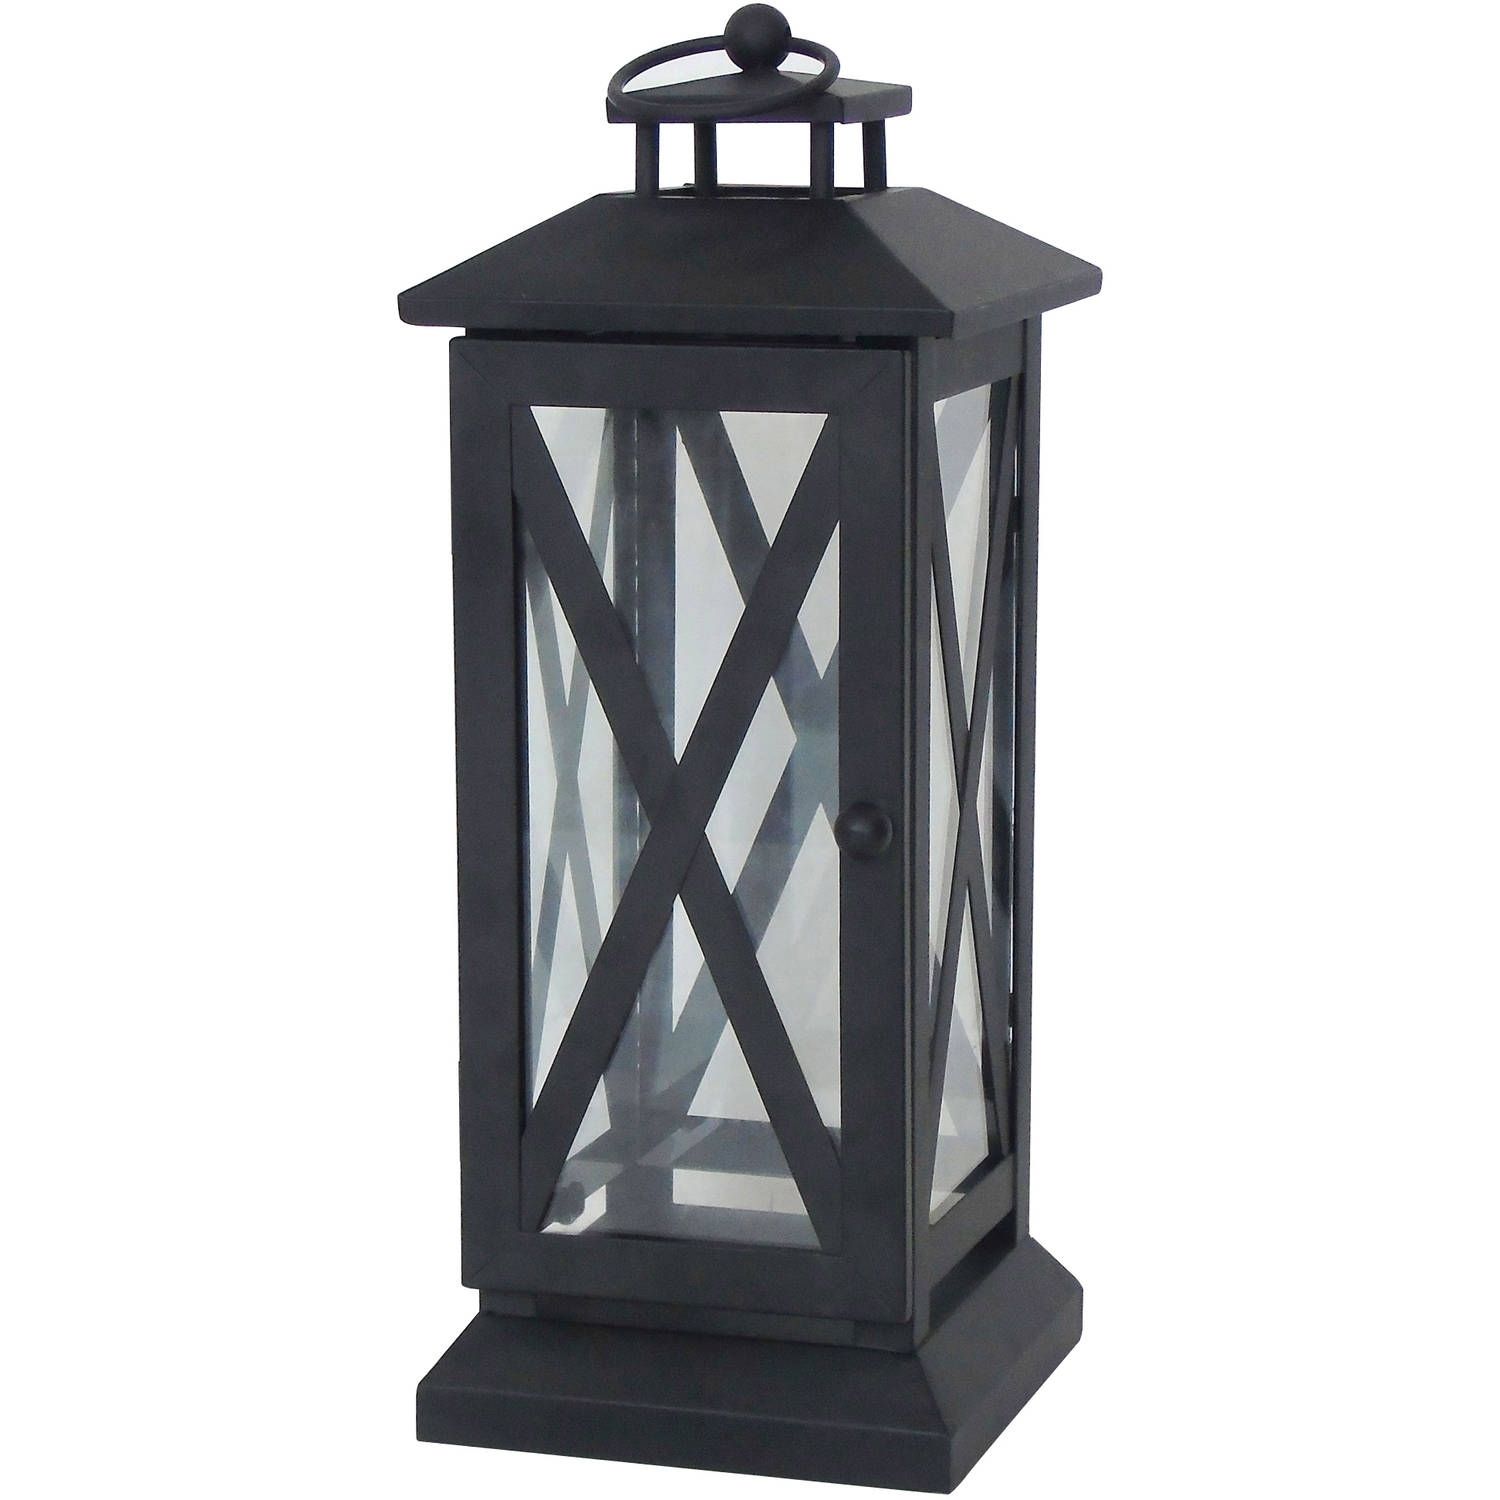 Better Homes And Gardens Crossbar Metal Outdoor Lantern – Walmart With Walmart Outdoor Lanterns (View 5 of 20)